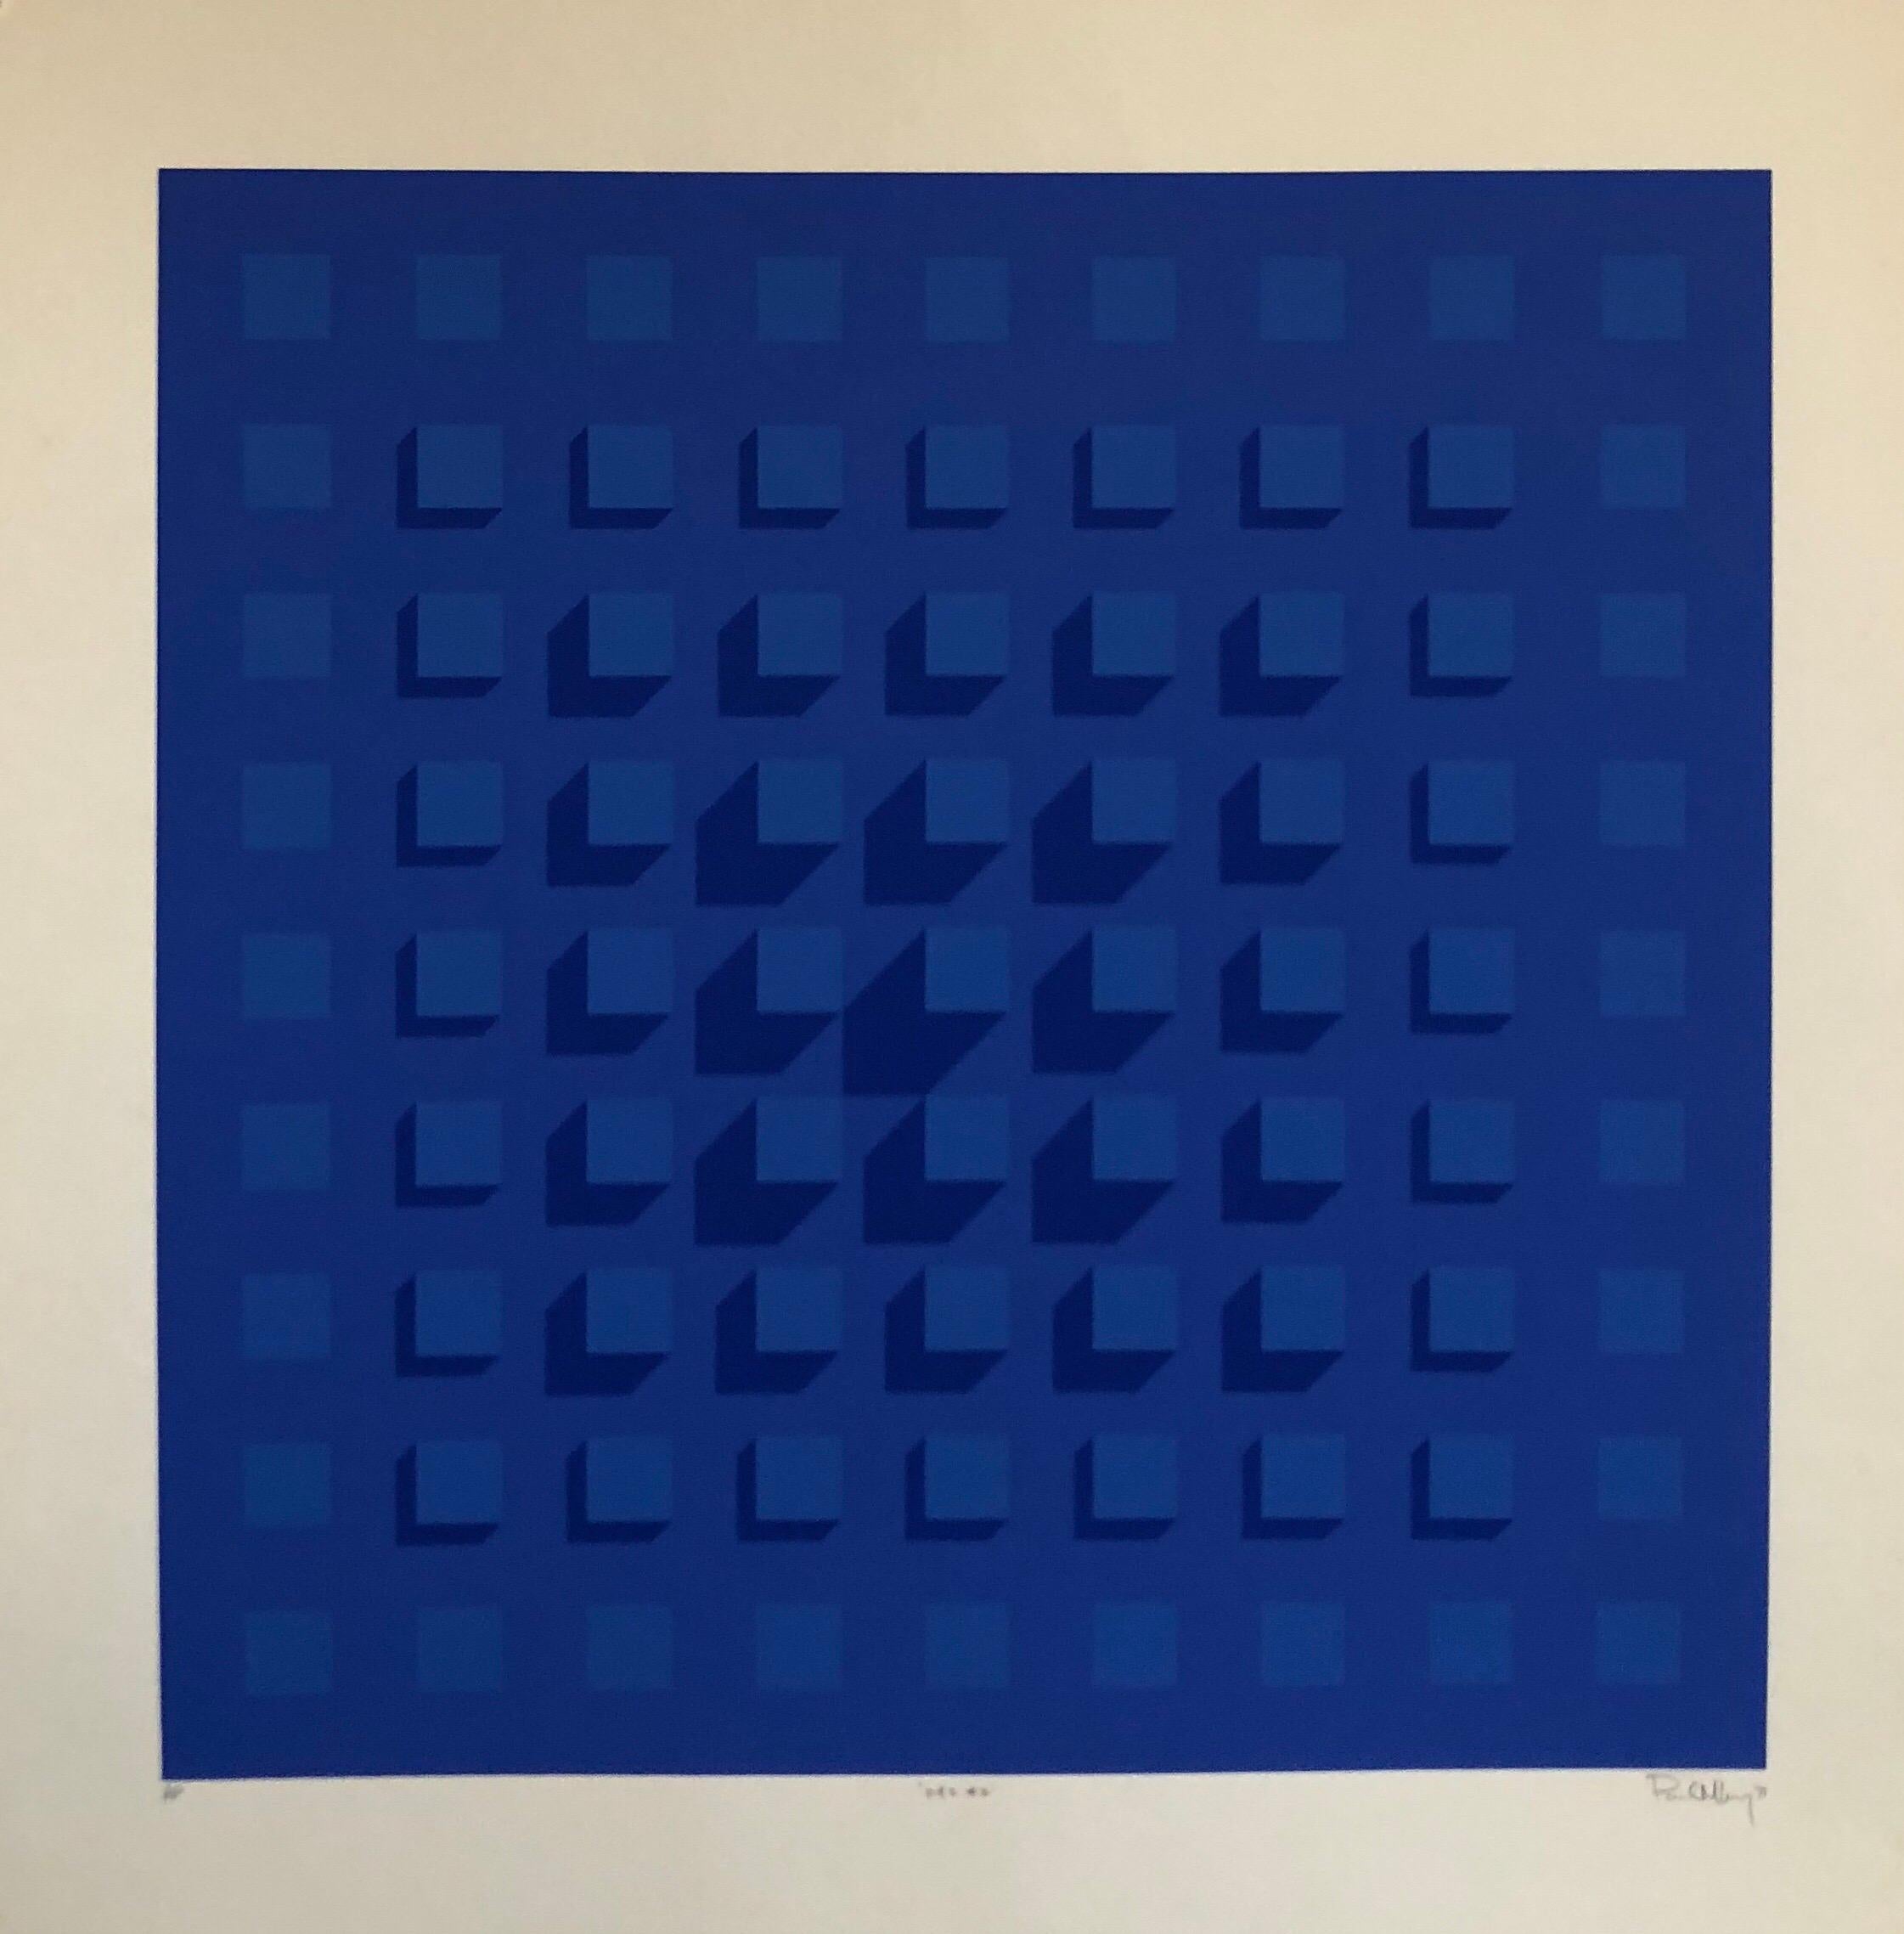 Paul M. Levy Abstract Print - Abstract Geometric 1970s Vintage Silkscreen Screen Print Manner of Vasarely